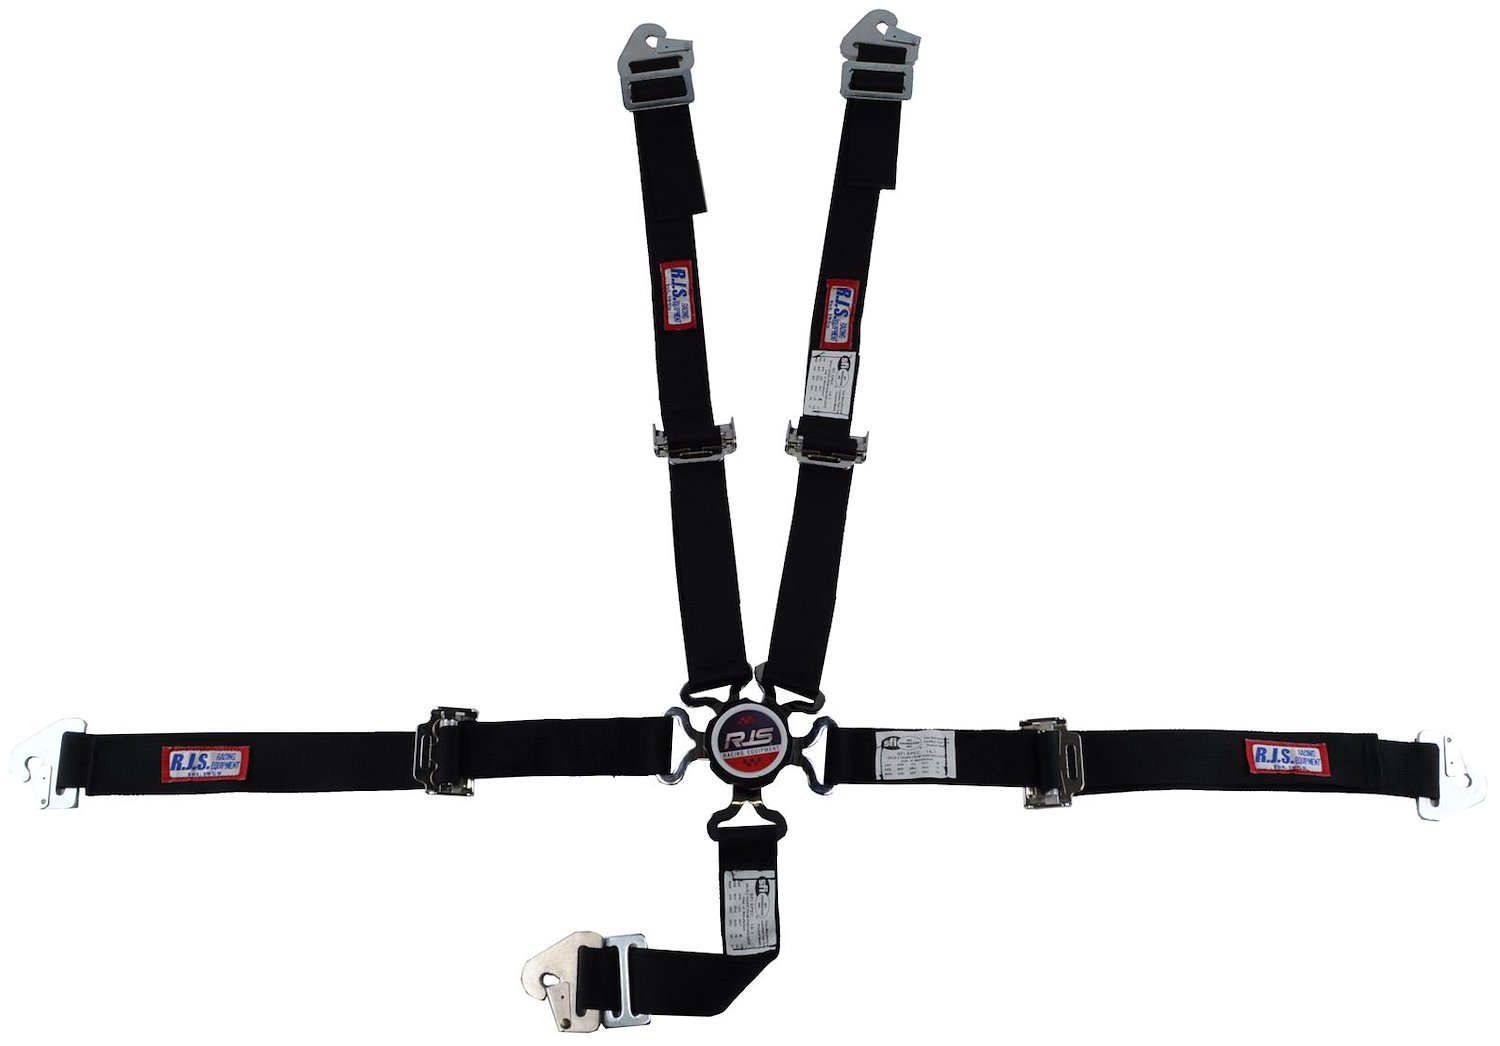 SFI 16.1 CAM-LOCK HARNESS 2 PULL UP Lap Belt 2 Shoulder Harness Individual ROLL BAR Mount 2 DOUBLE Sub ALL WRAP/BOLT ENDS PURPLE